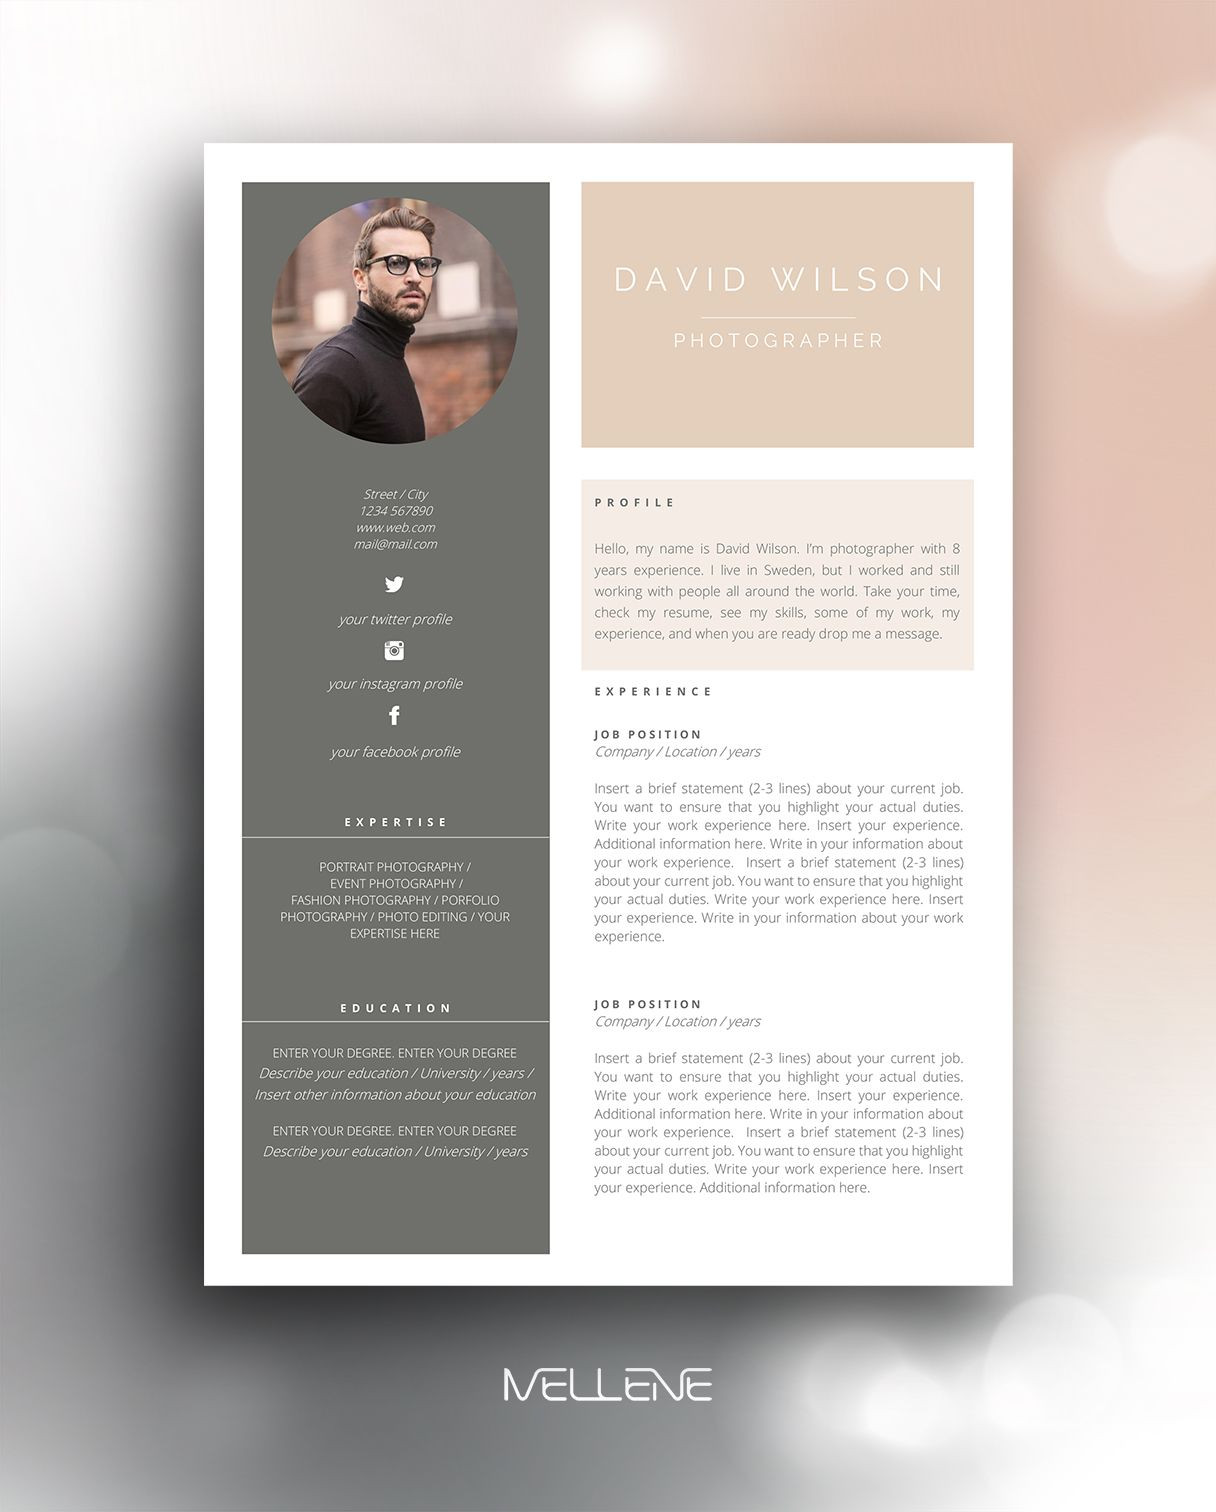 Free Resume Template with Photo Insert Download Resume Template for Pages / Ms Word Cv Template with Photo   Cover …